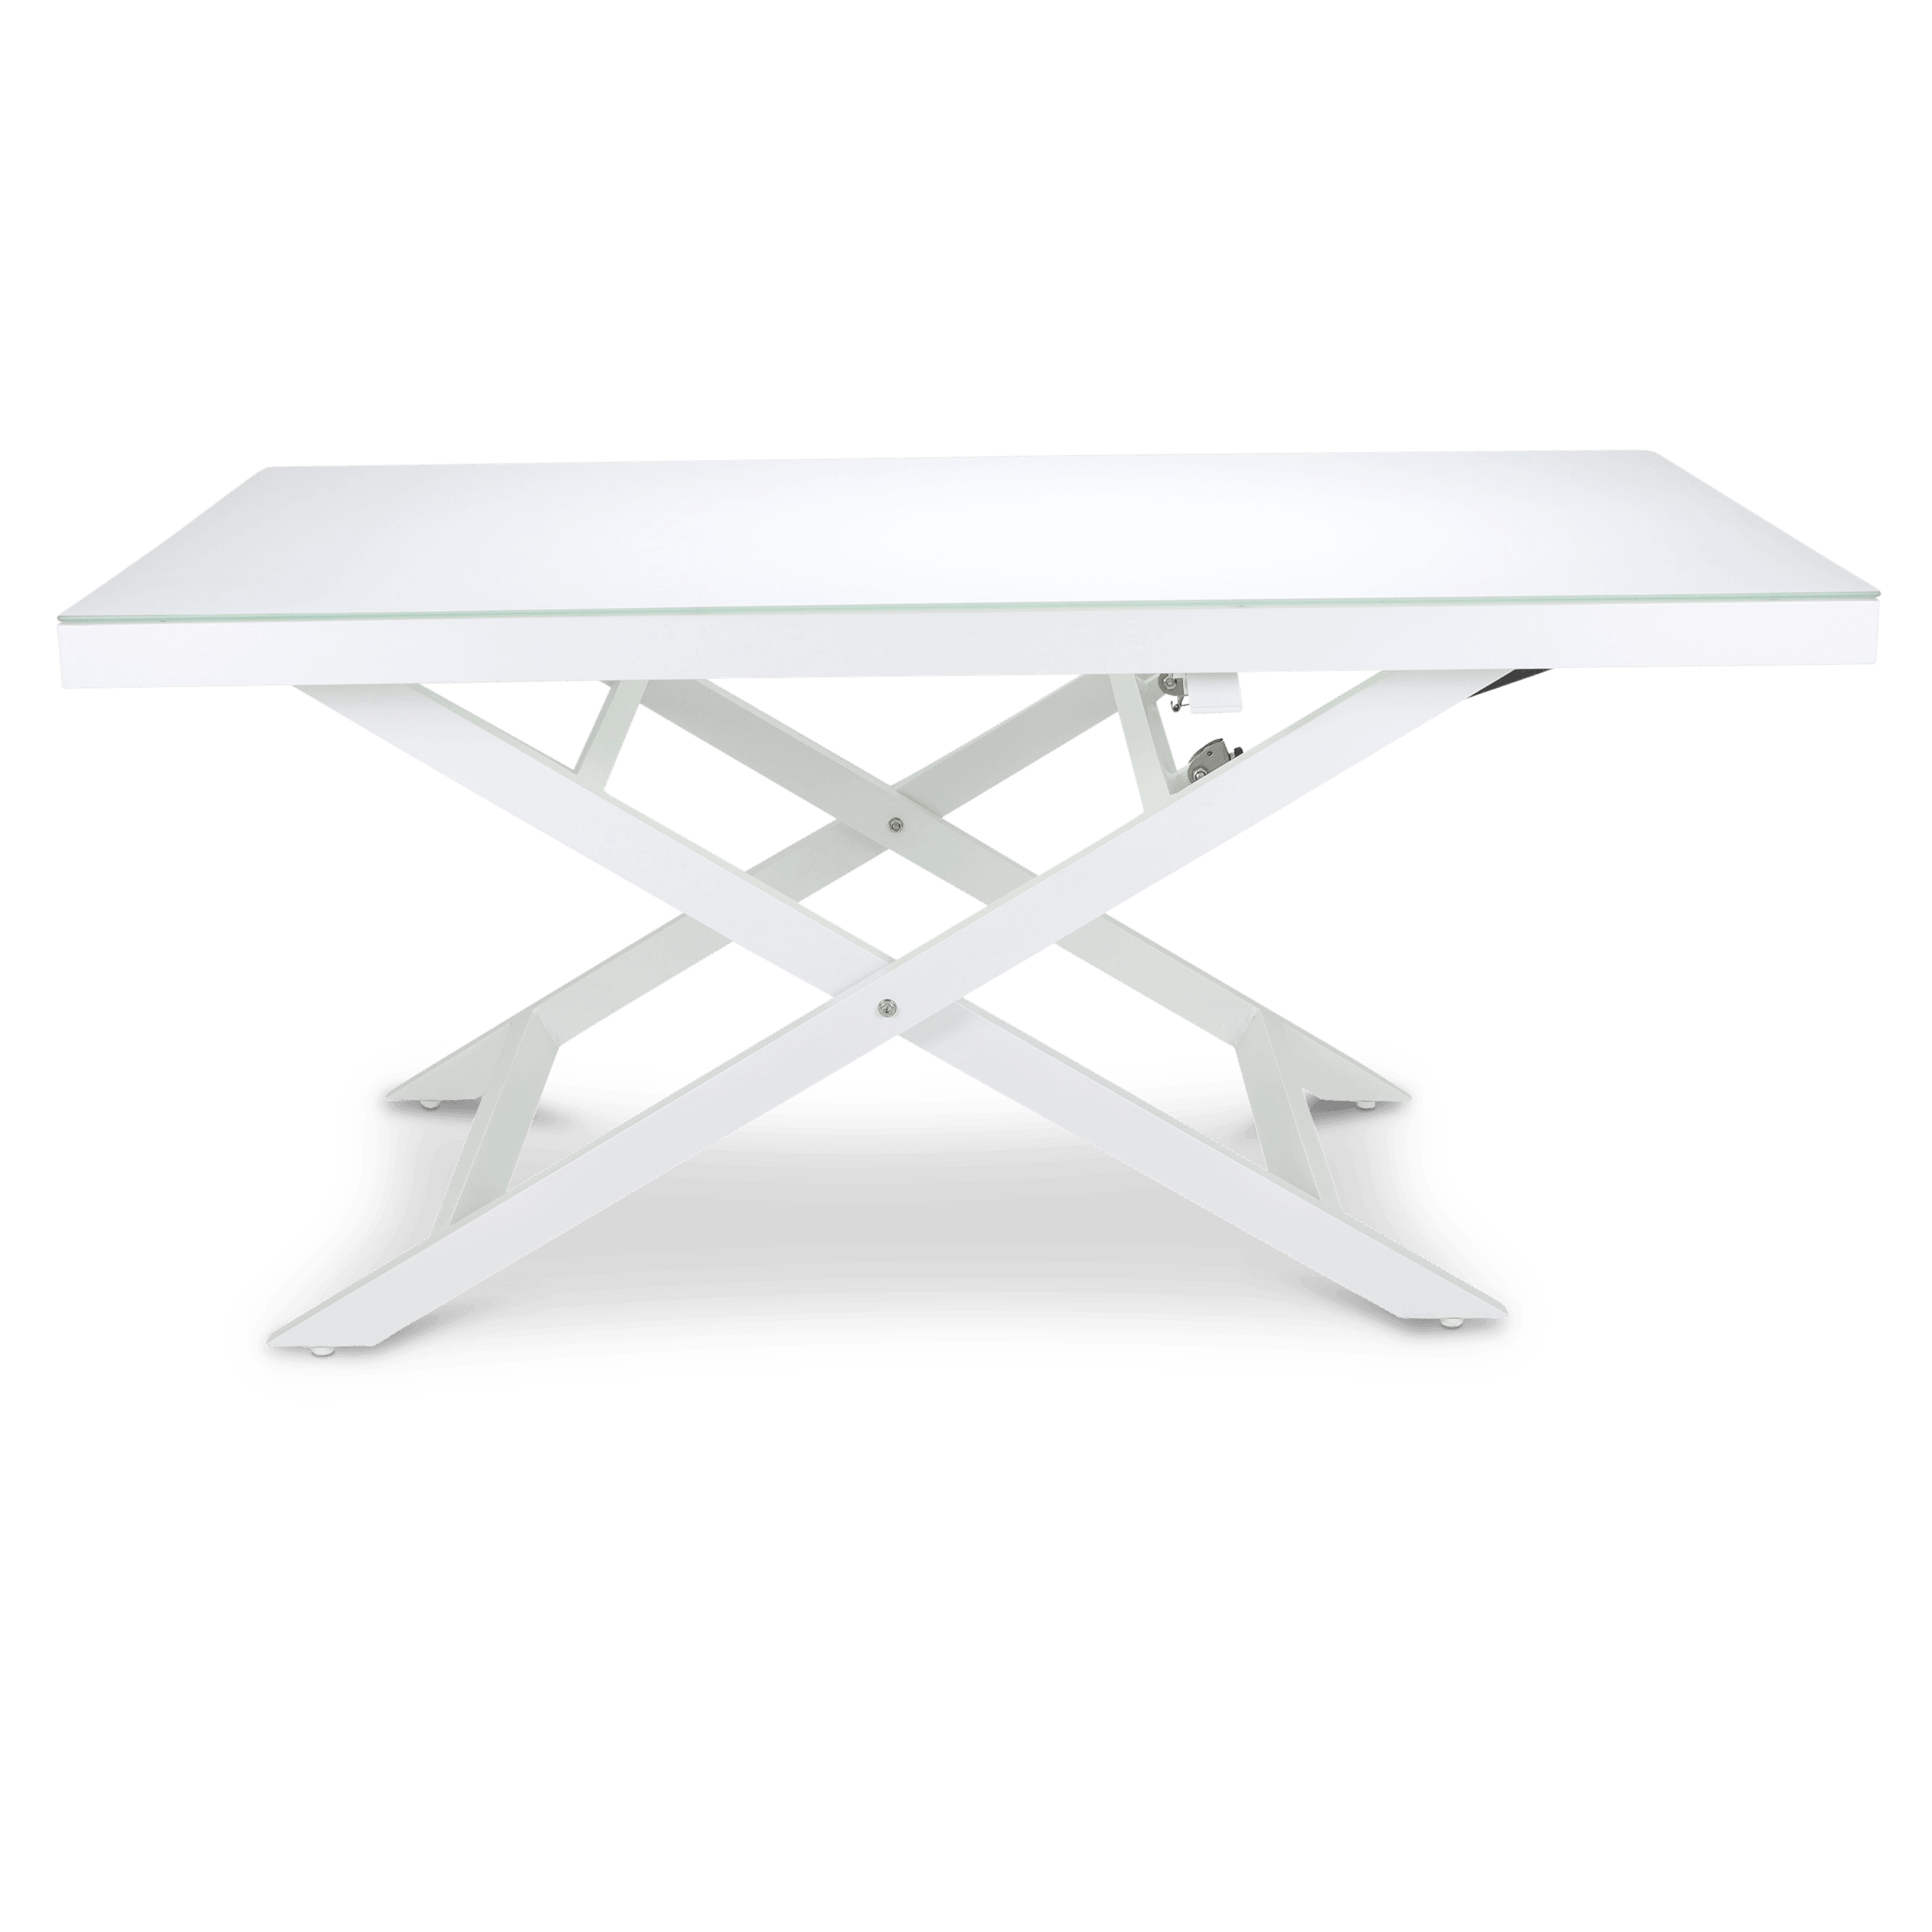 Mykonos Adjustable Coffee Table in Arctic White Aluminium Frame and Glass Top - The Furniture Shack